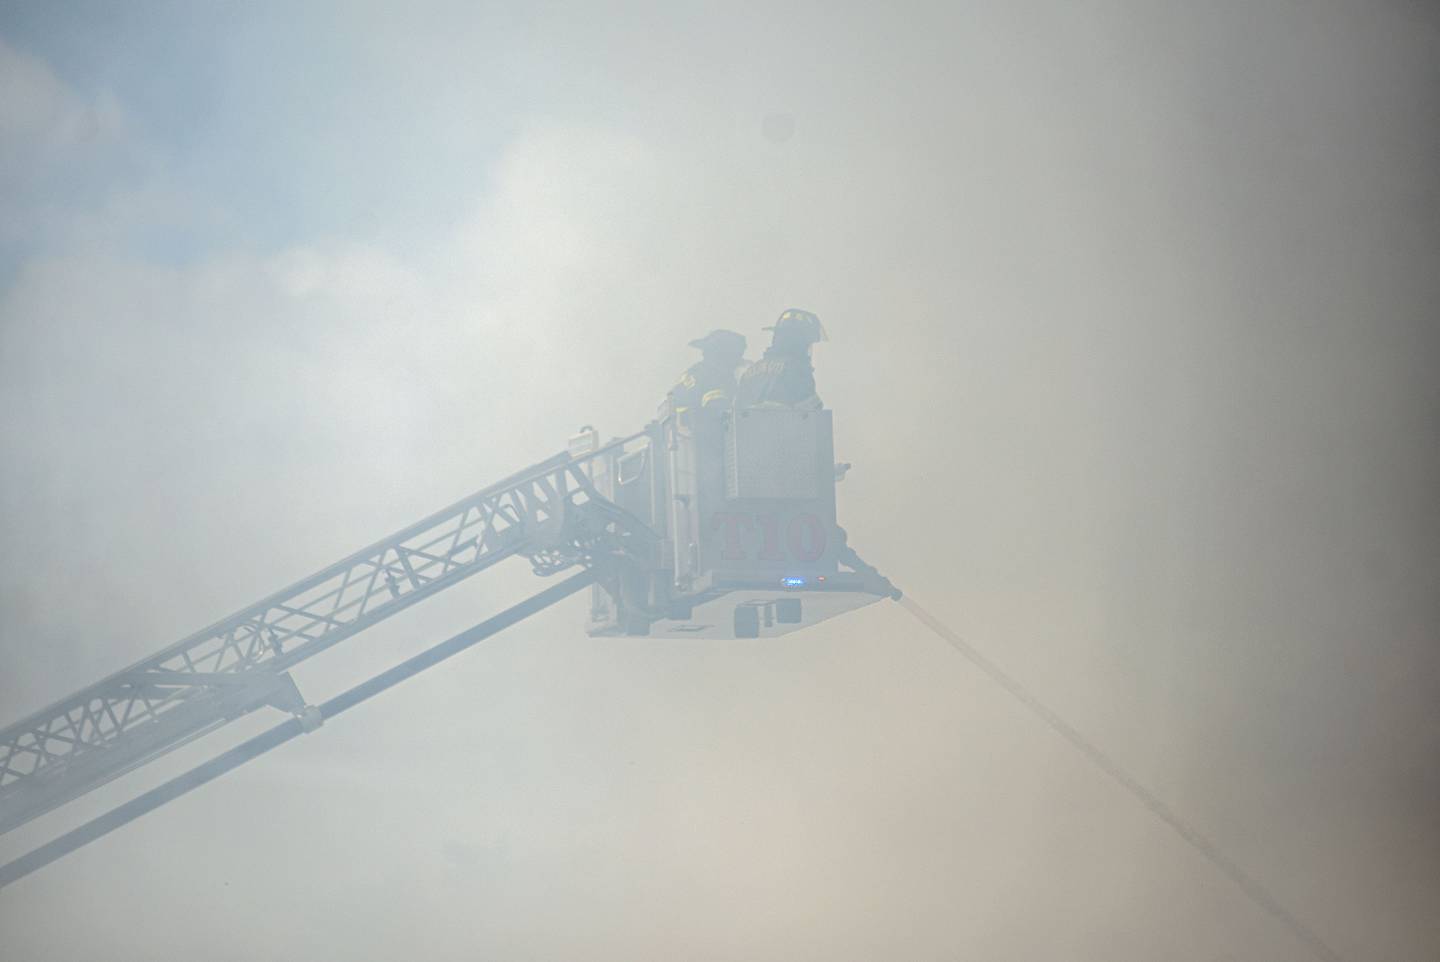 Heavy smoke obscures firefighters as they battle a blaze from a Snorkel truck Monday, Sept. 26, 2022 in Dixon.